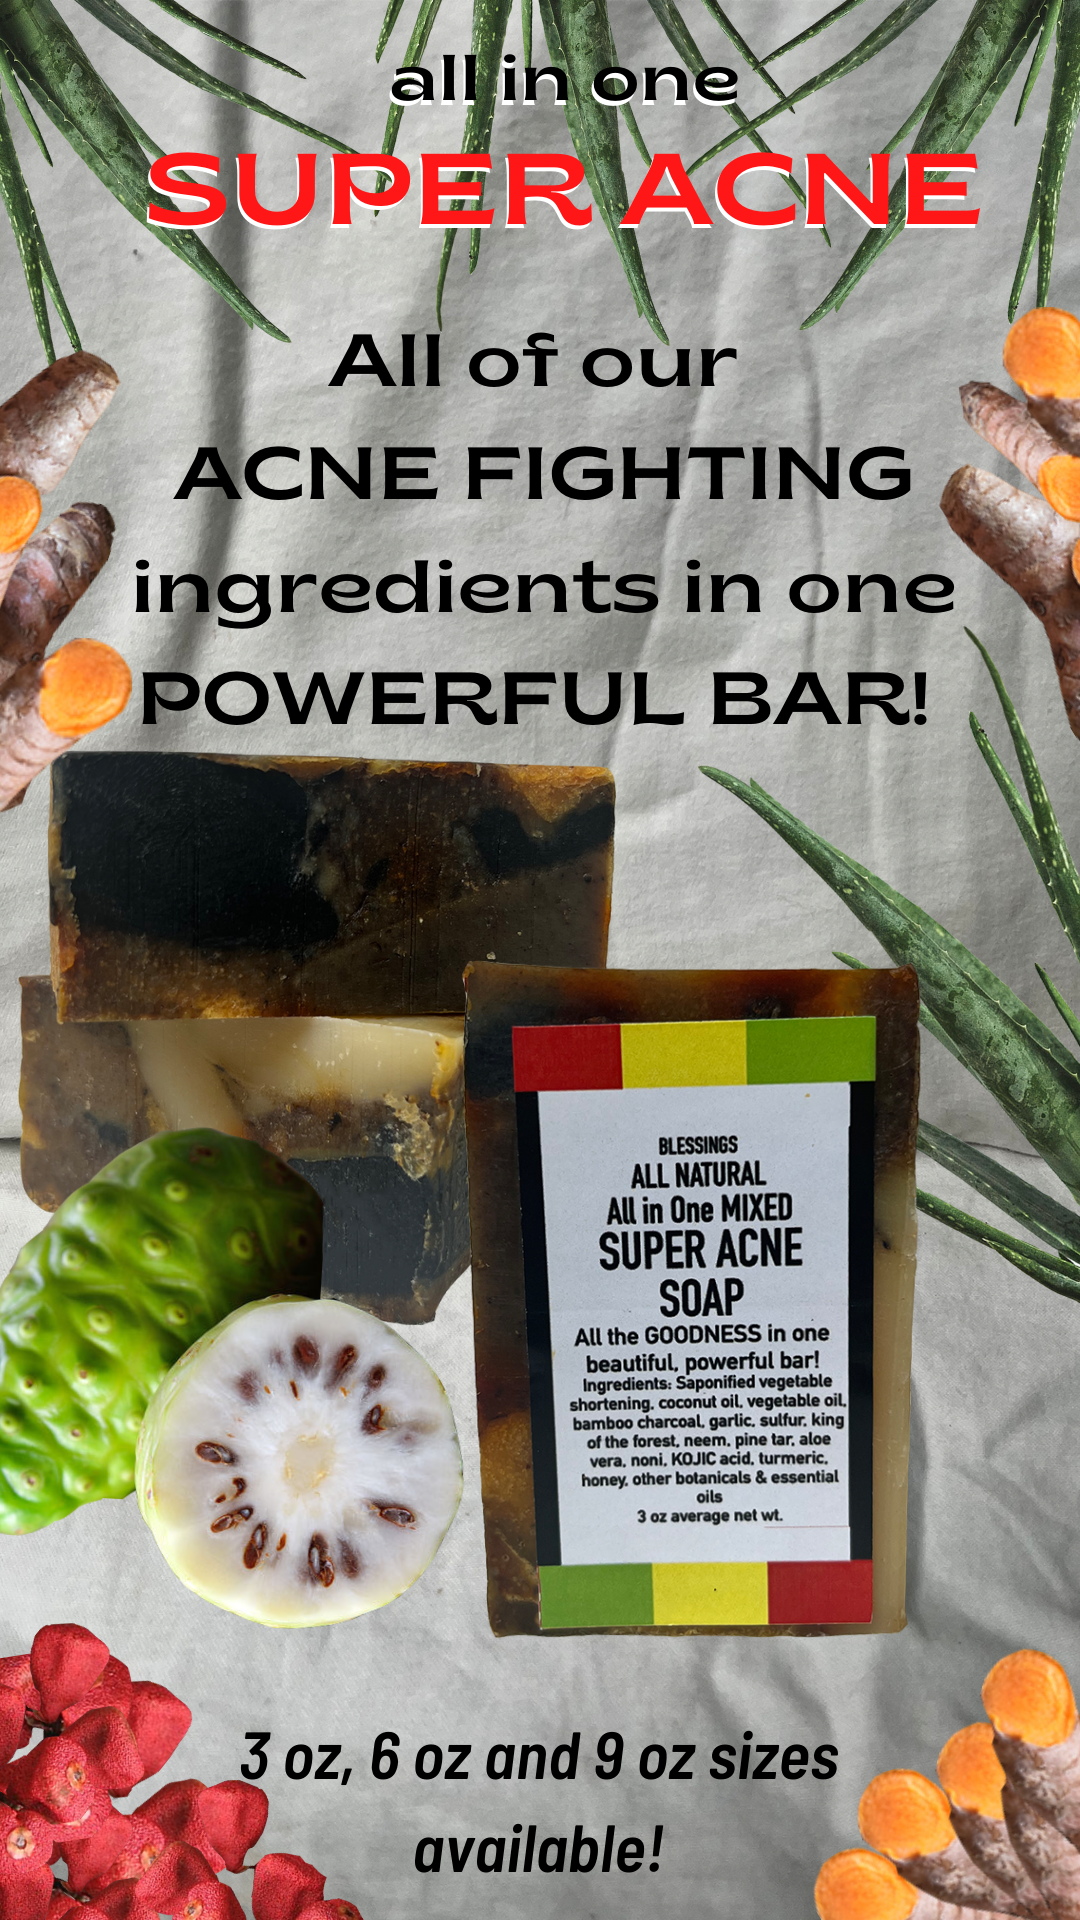 All in One Super Acne Soap